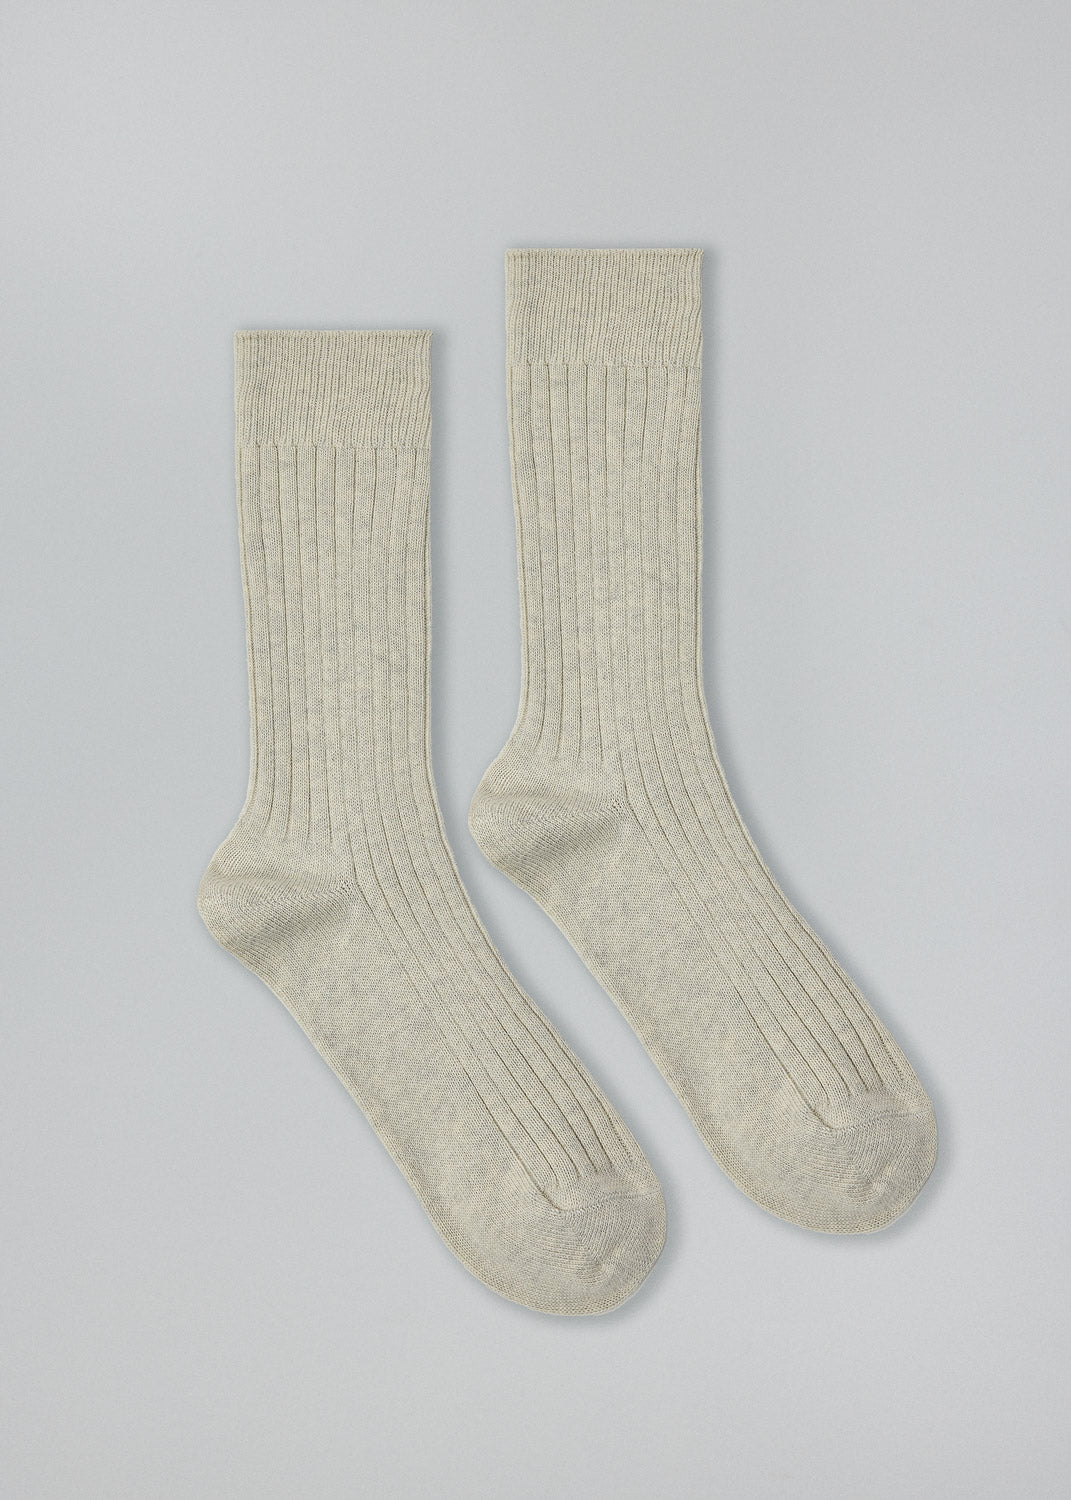 Lady White Co. - Natural LWC Socks | 1032 SPACE